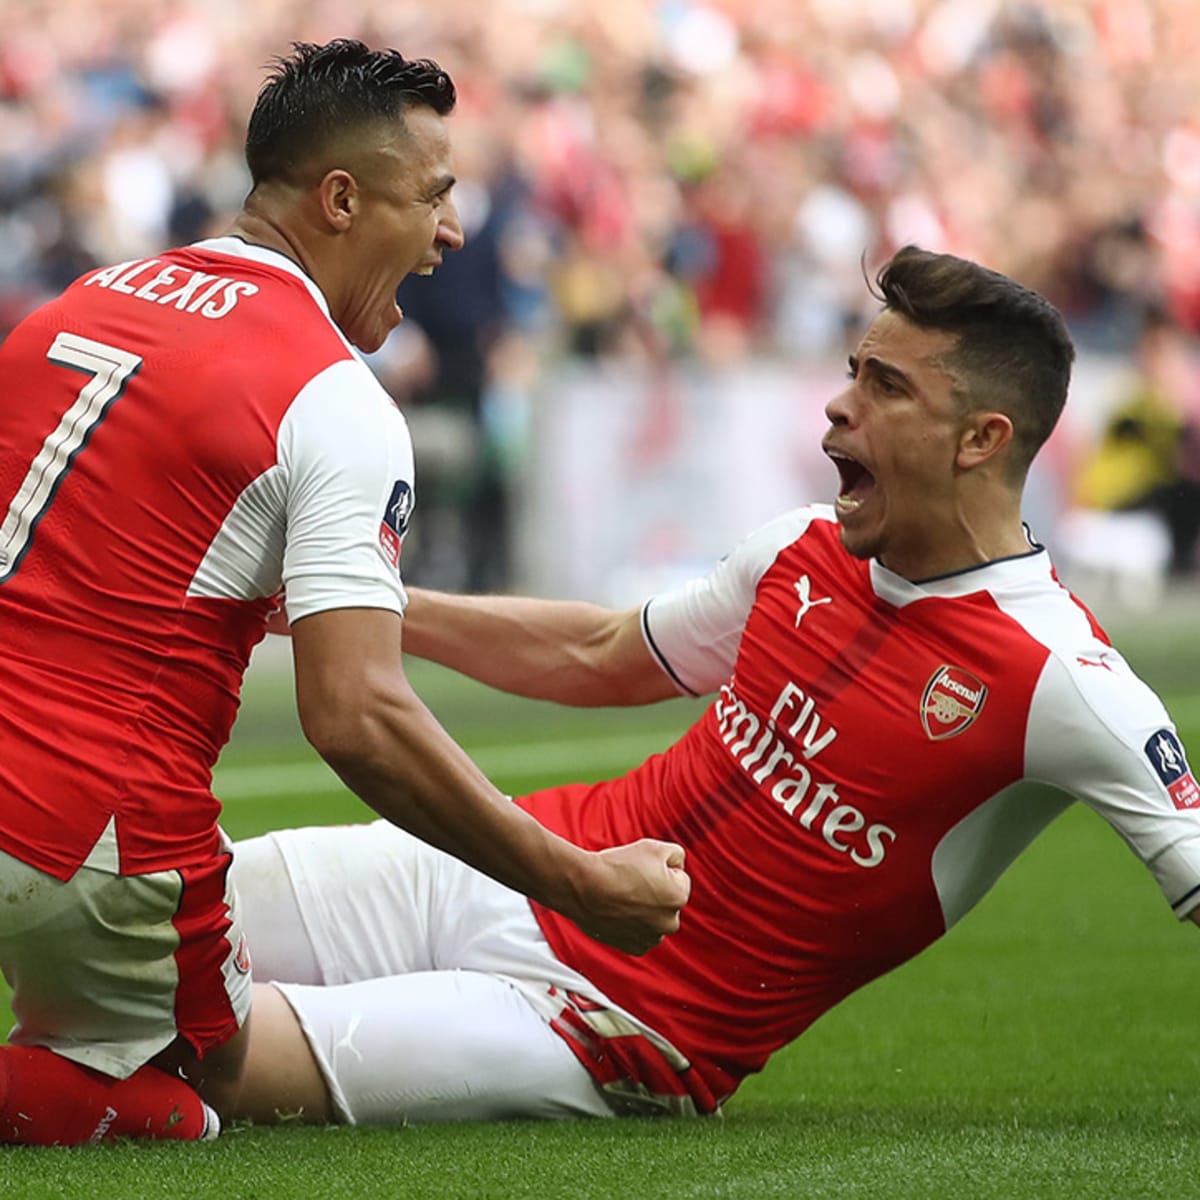 Arsenal vs Leicester City live stream Watch online, TV channel